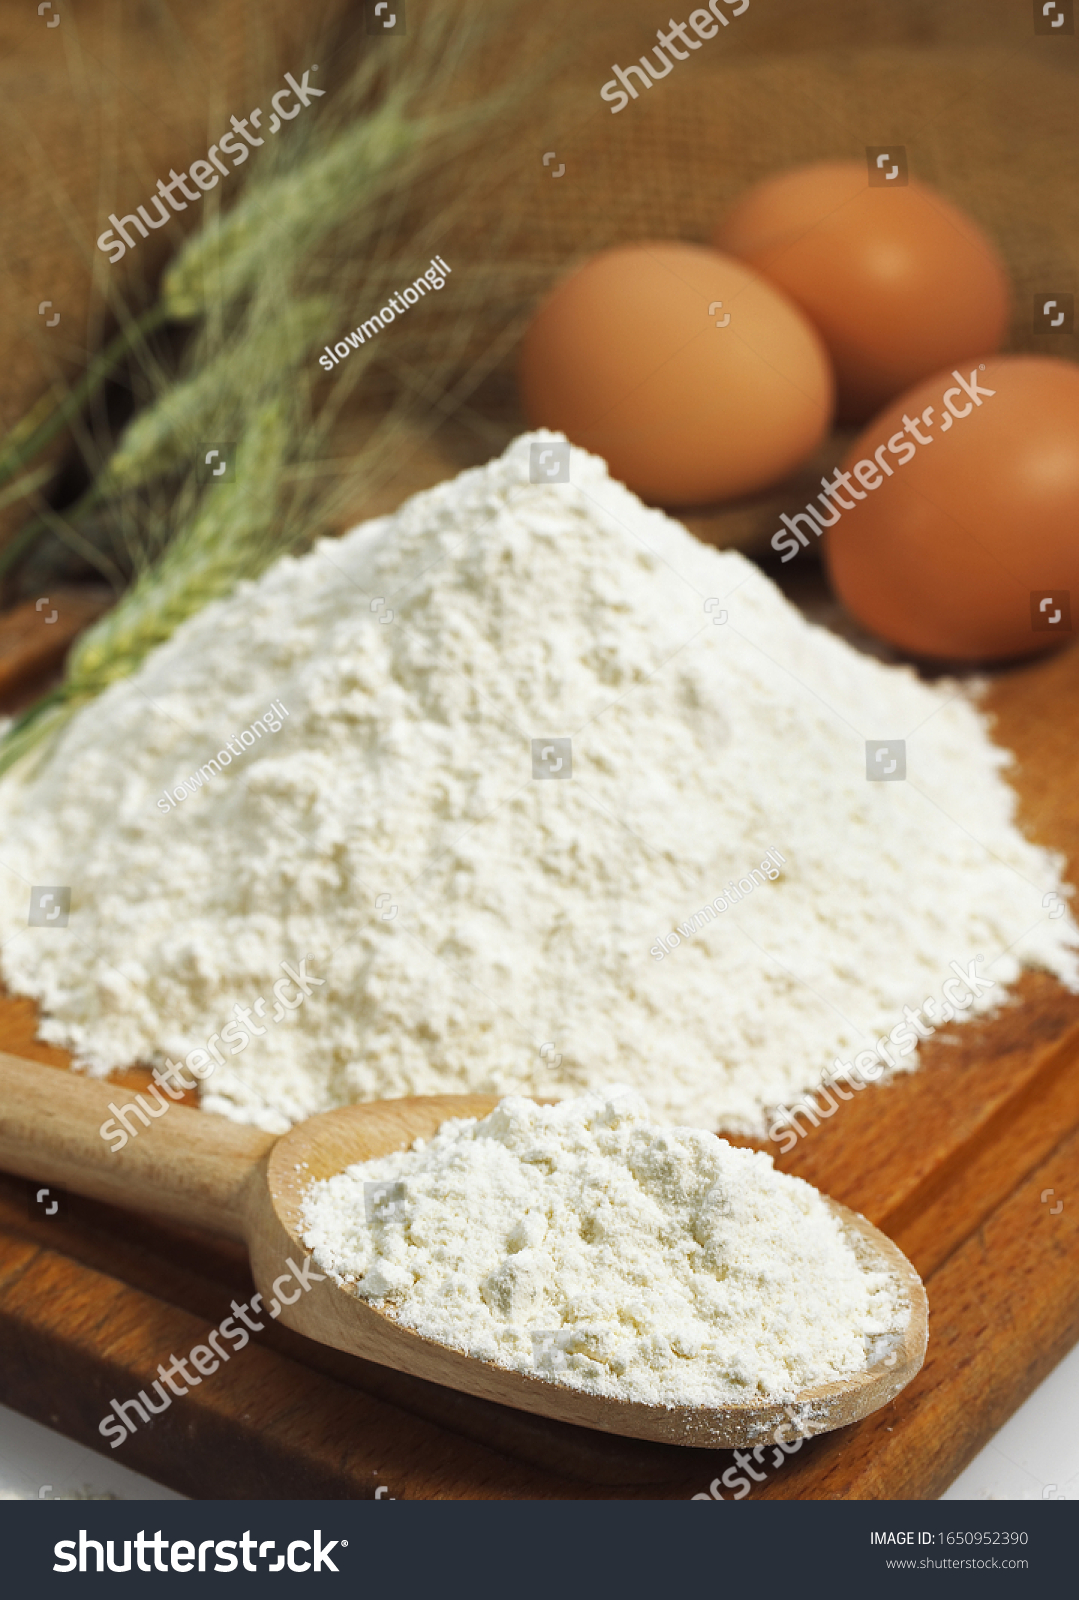 Wheat Flour and Eggs,  Ingredients for Cake Recipe   #1650952390